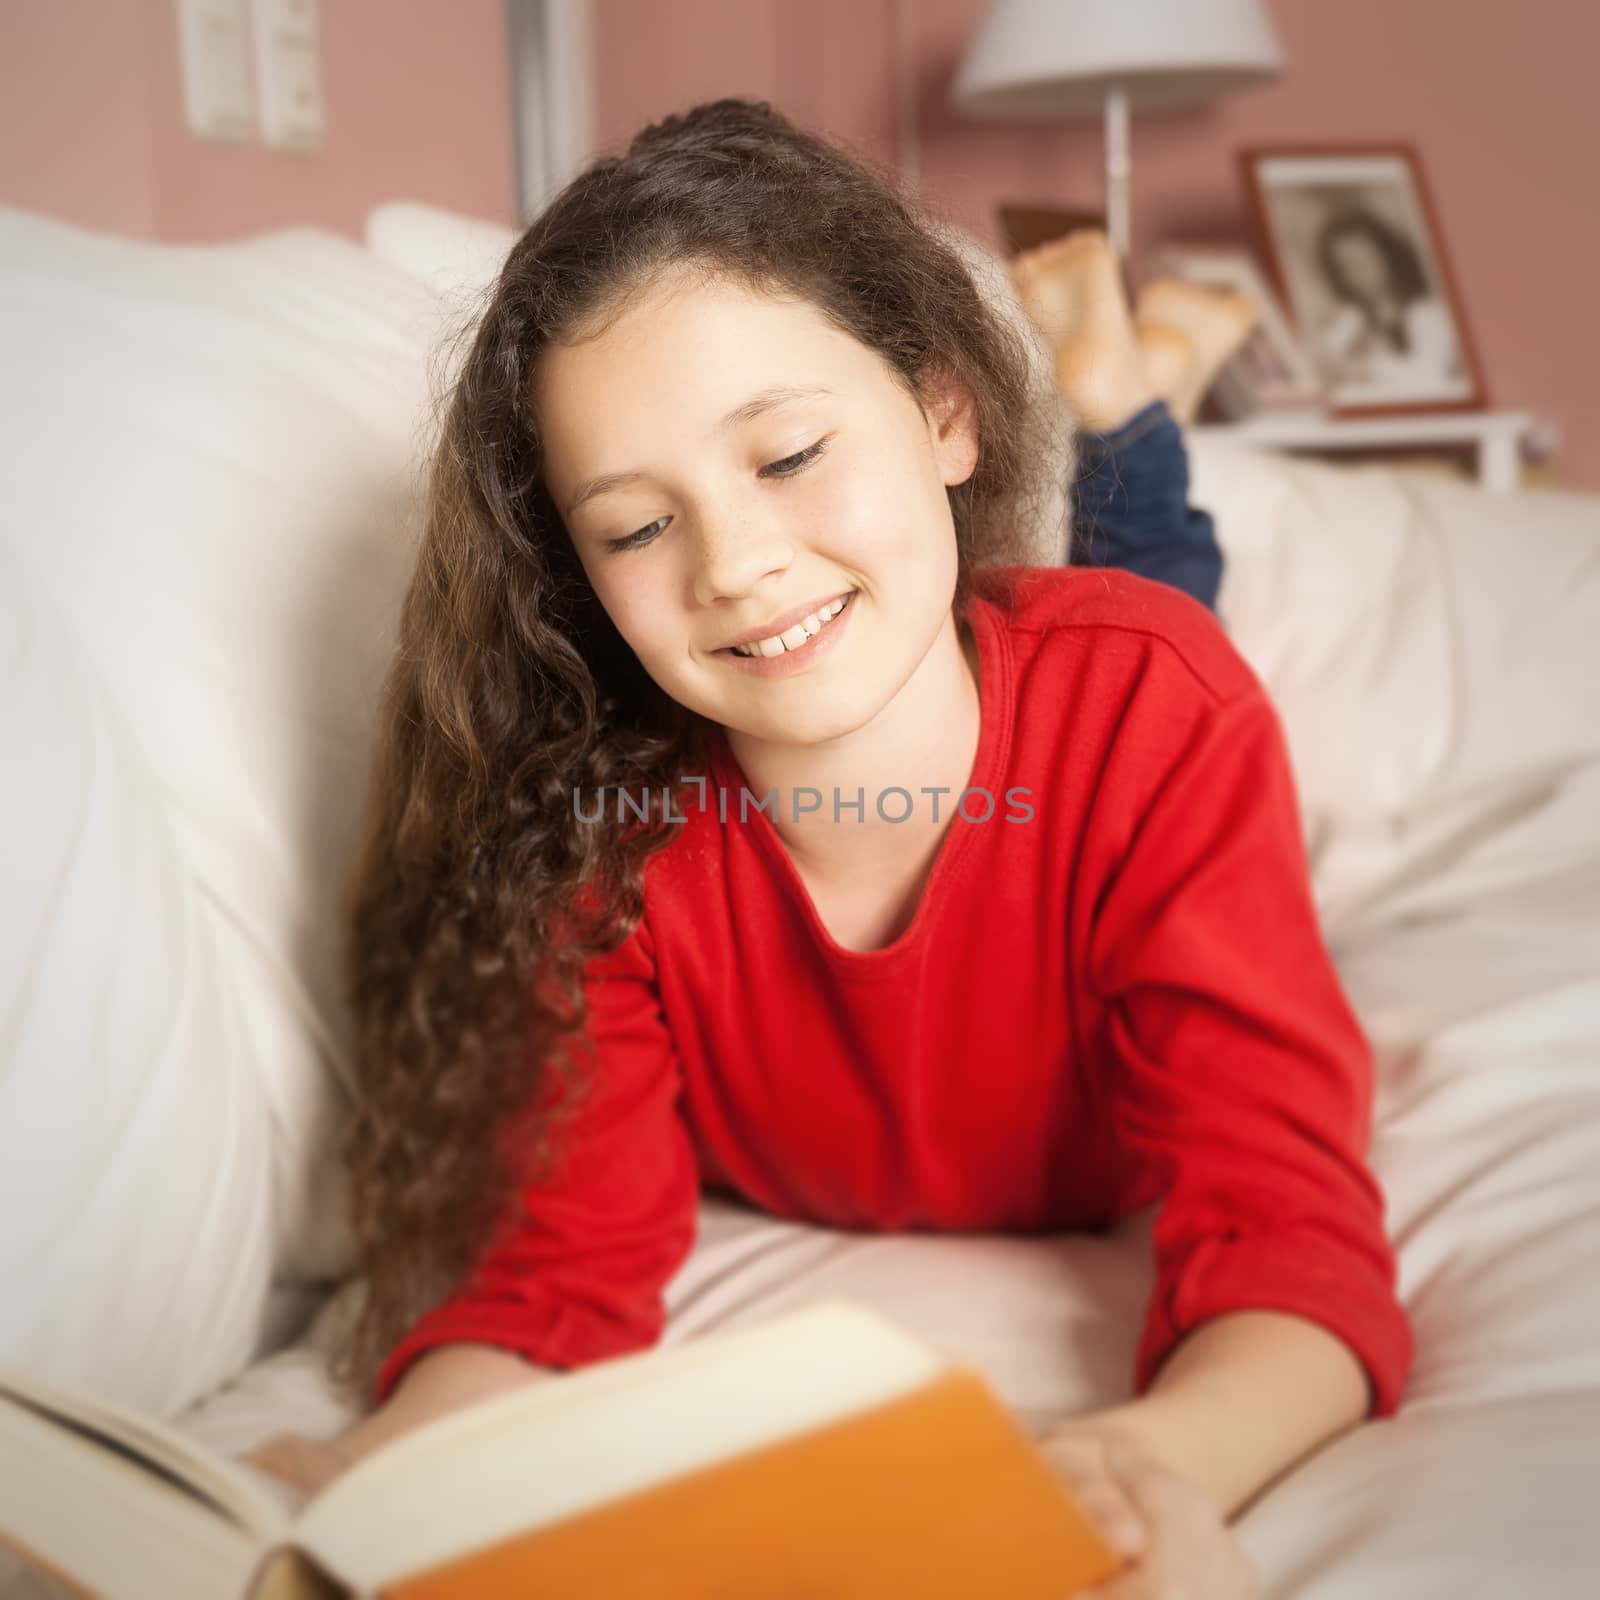 An image of a girl with a book on the sofa